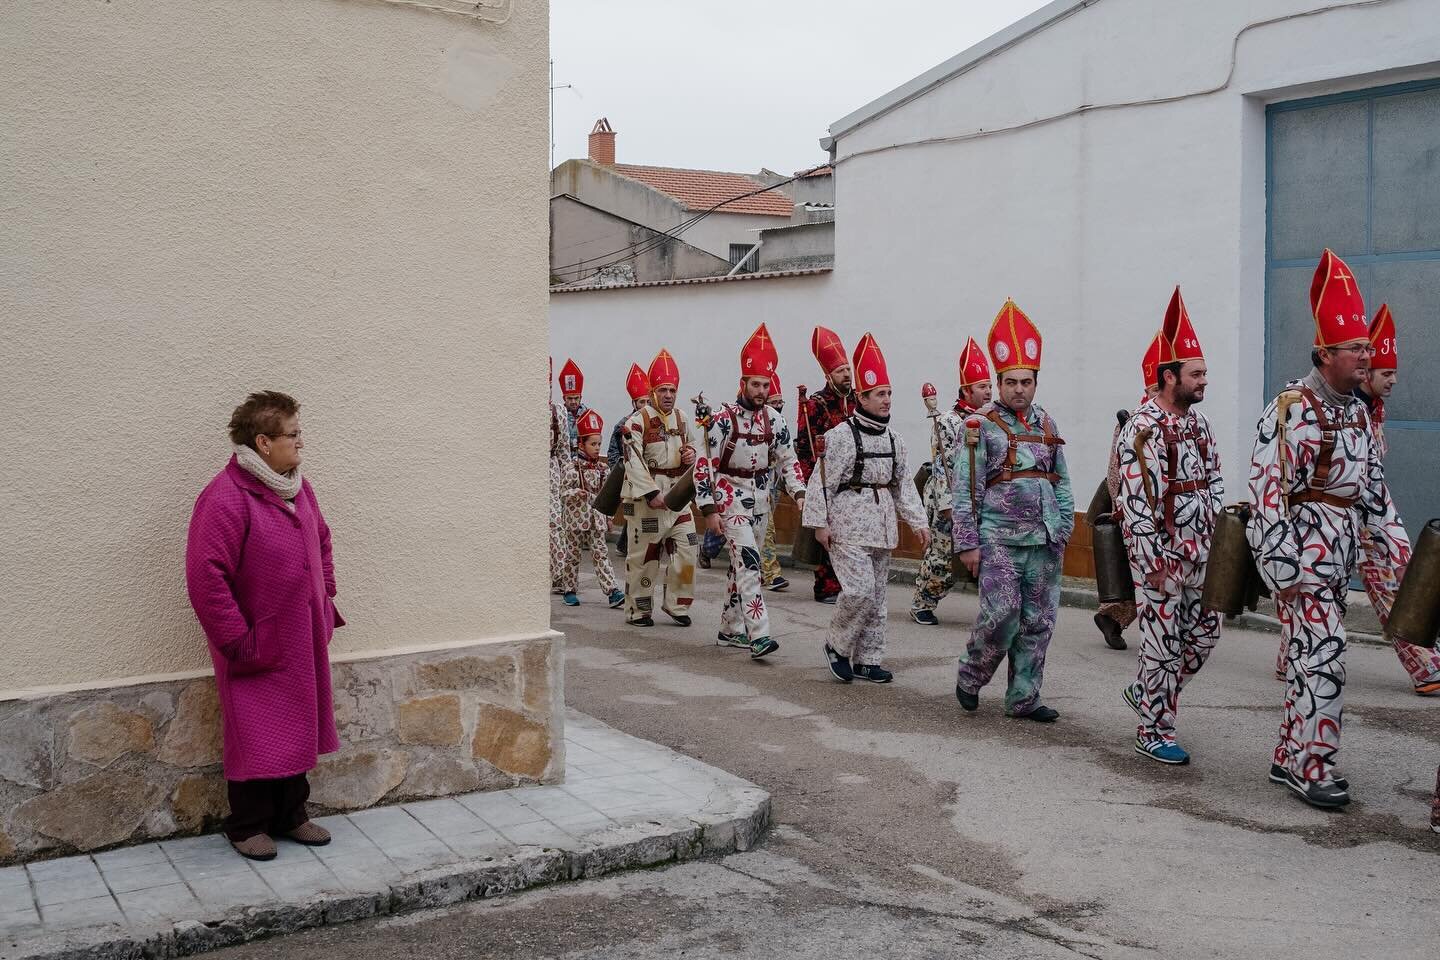 &lsquo;La Endiablada&rsquo;, translated as &lsquo;The Brotherhood of the Devils&rsquo;, is a tradition which has survived through the centuries and is held each year in the Spanish town of Almonacid del Marquesado (Cuenca, Castilla la Mancha).

Membe